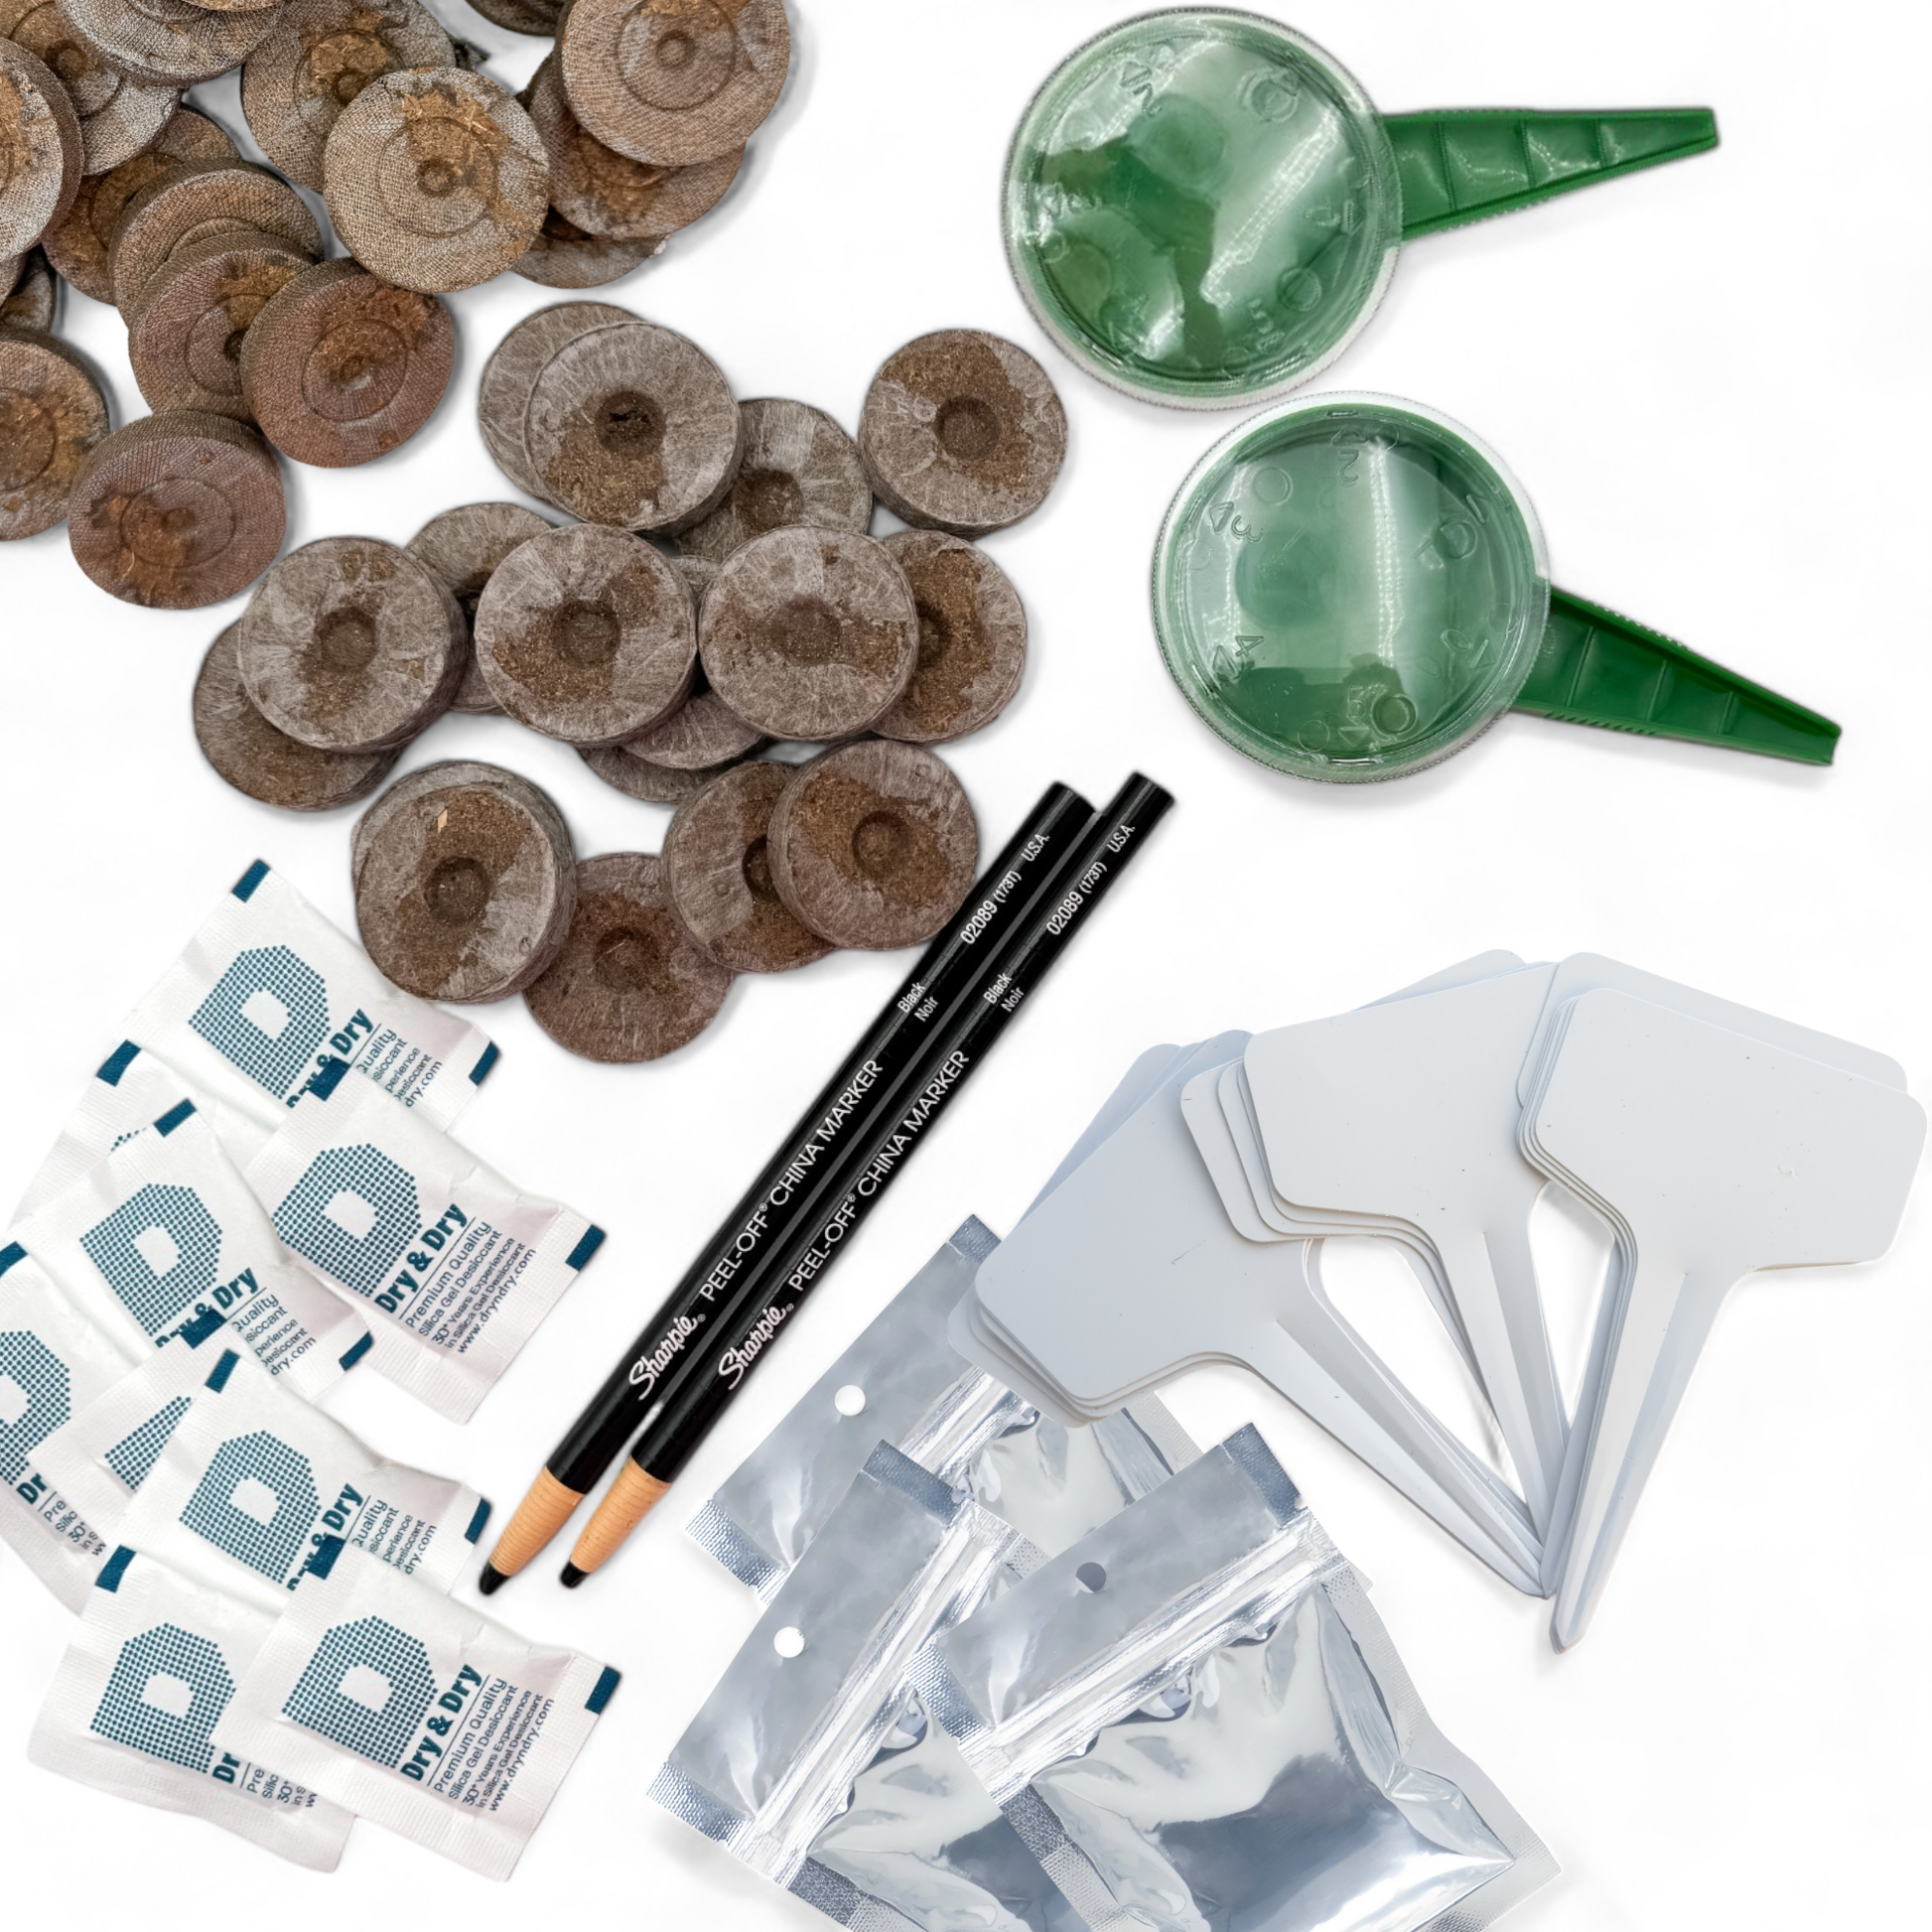 Complete garden starter kit displayed on a white backdrop with tools, seeds, and planting